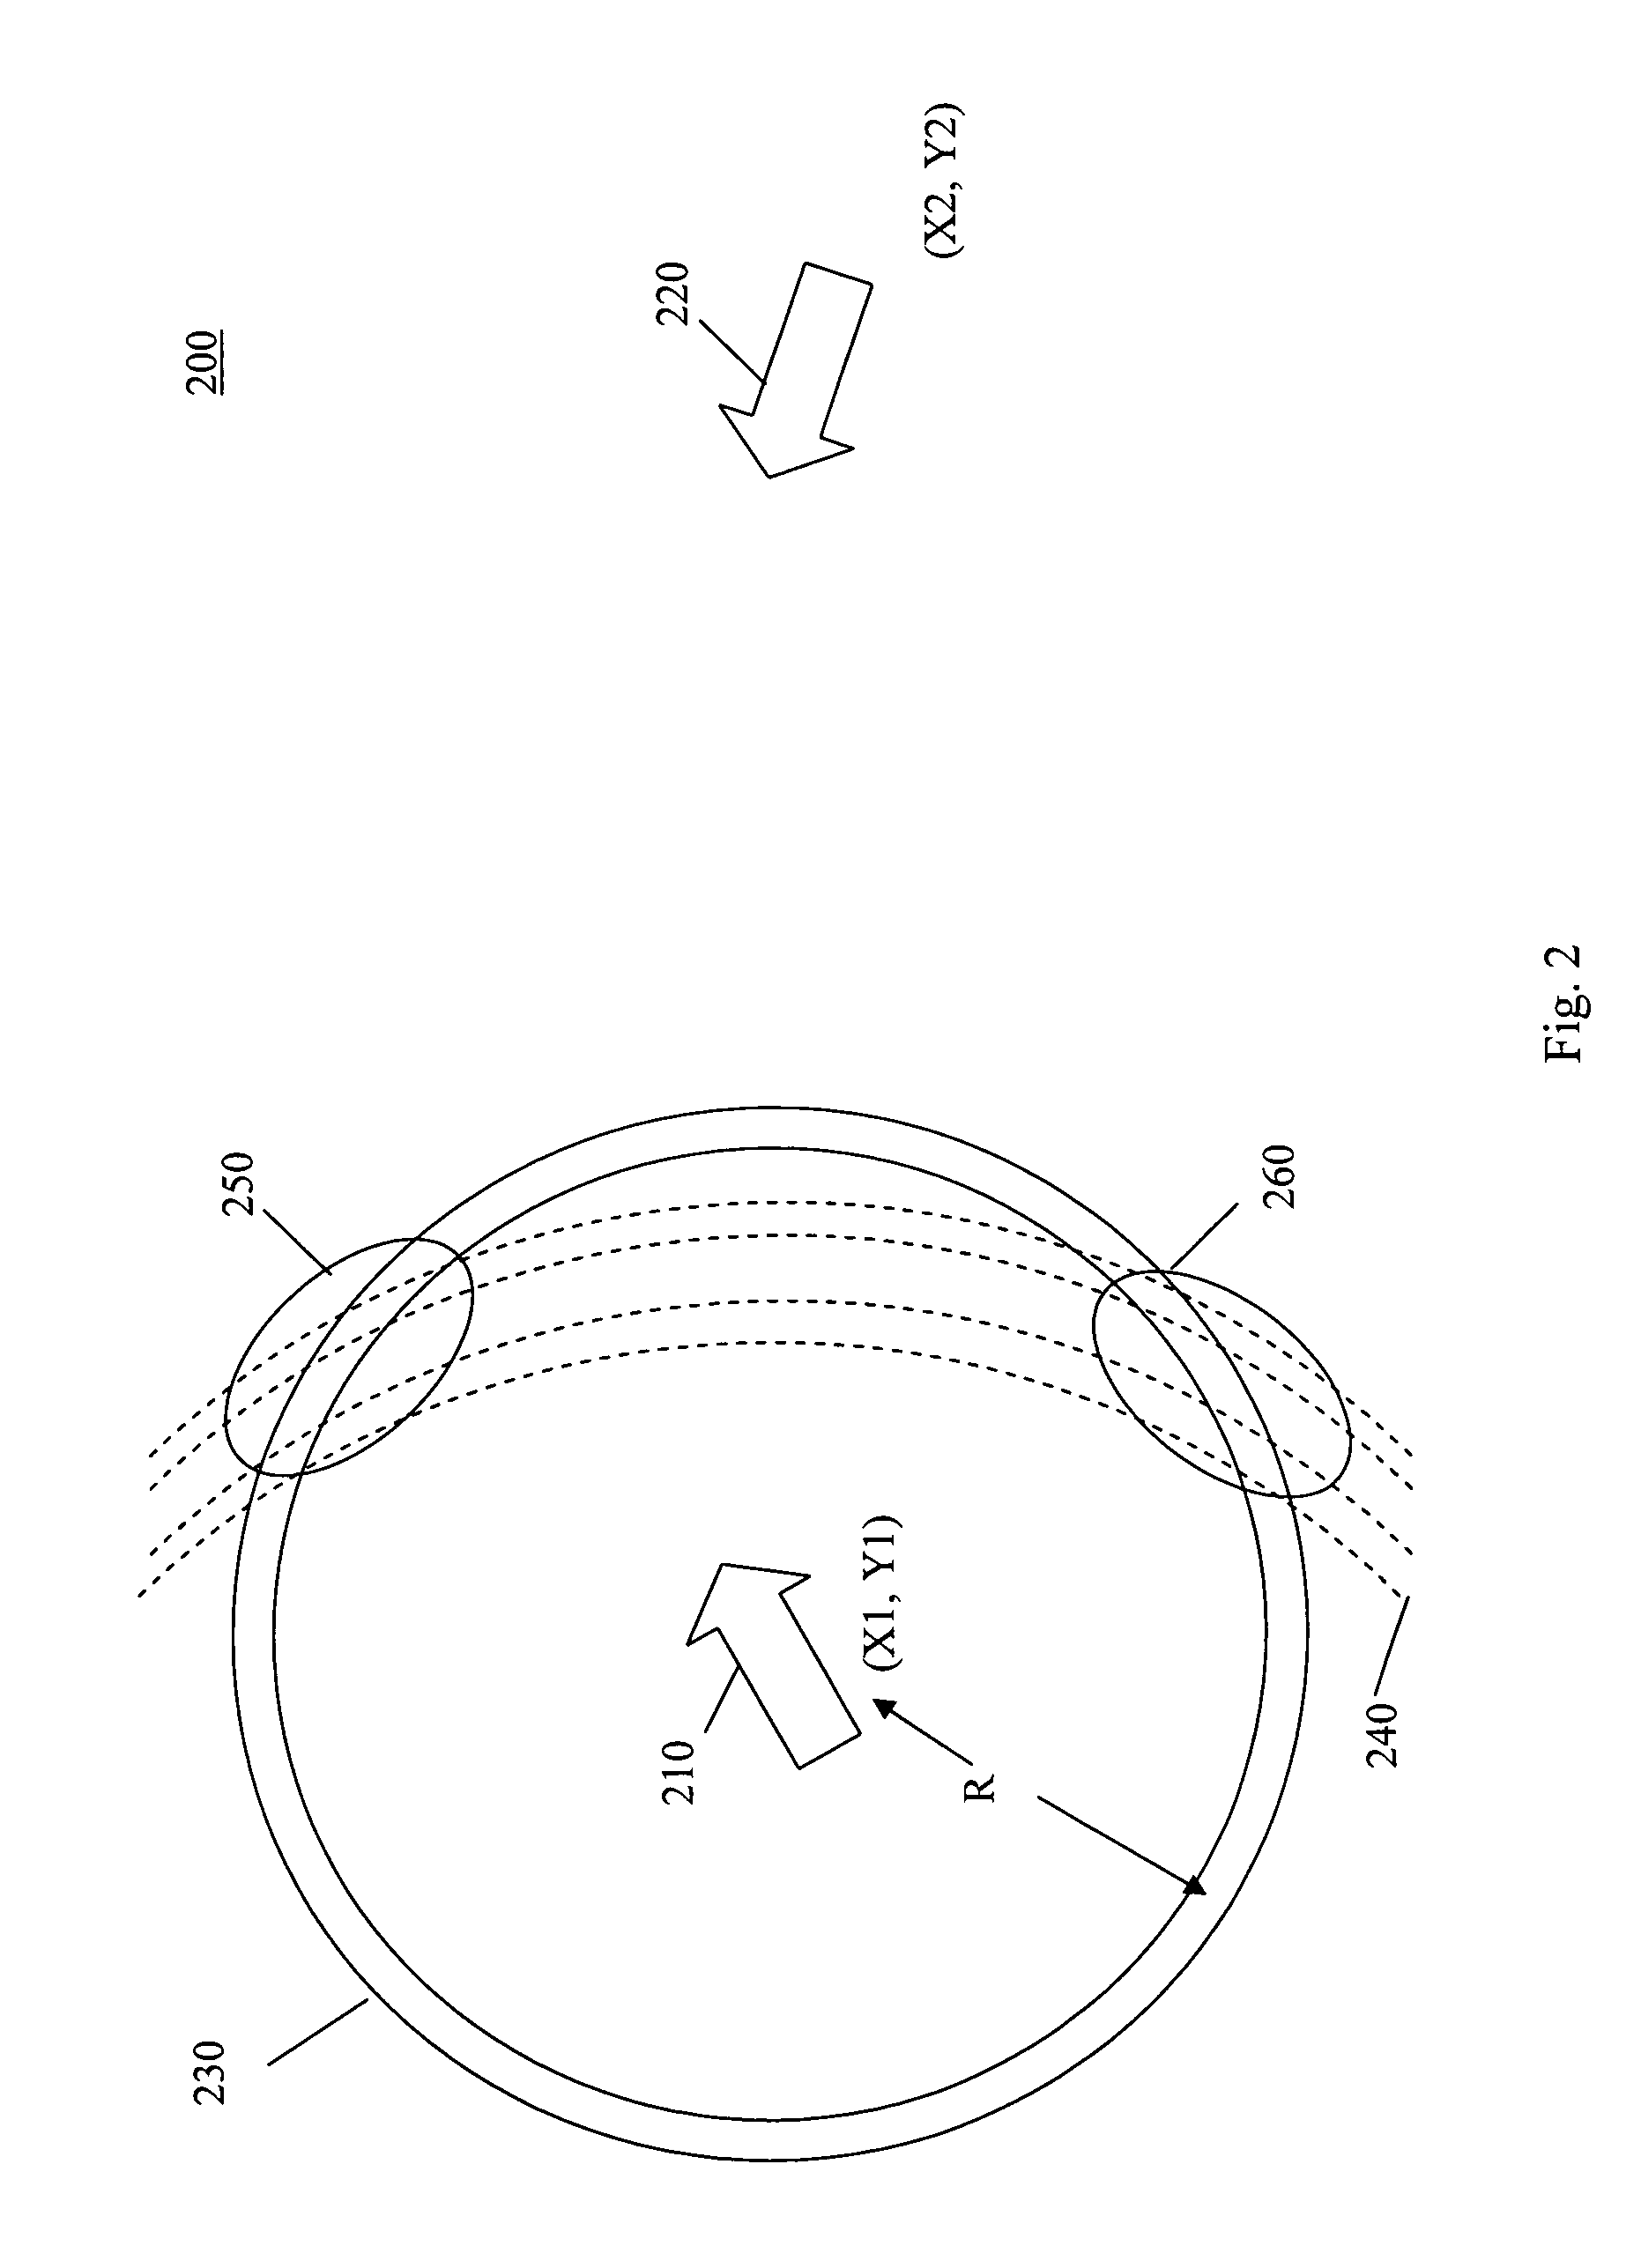 Asynchronous wireless communication system